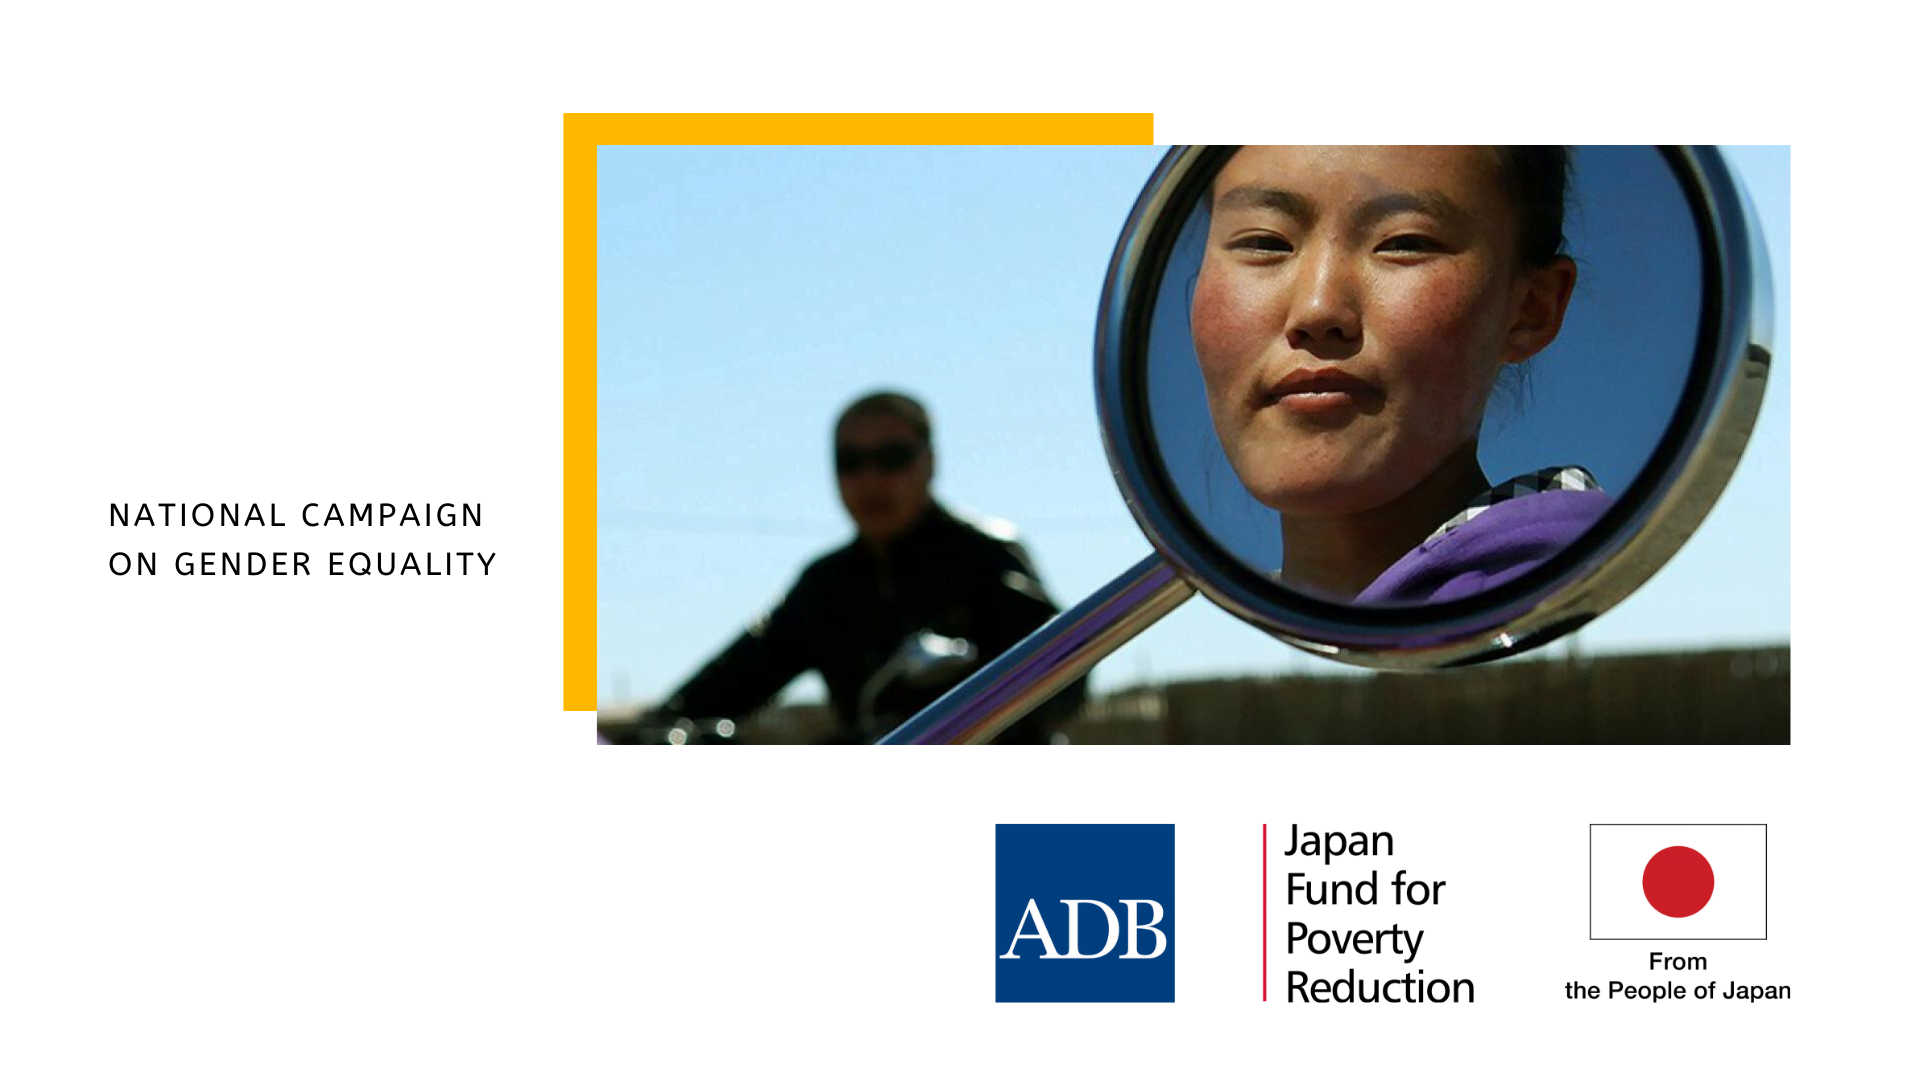 ADB's Gender Equality Campaign signs up EMPR